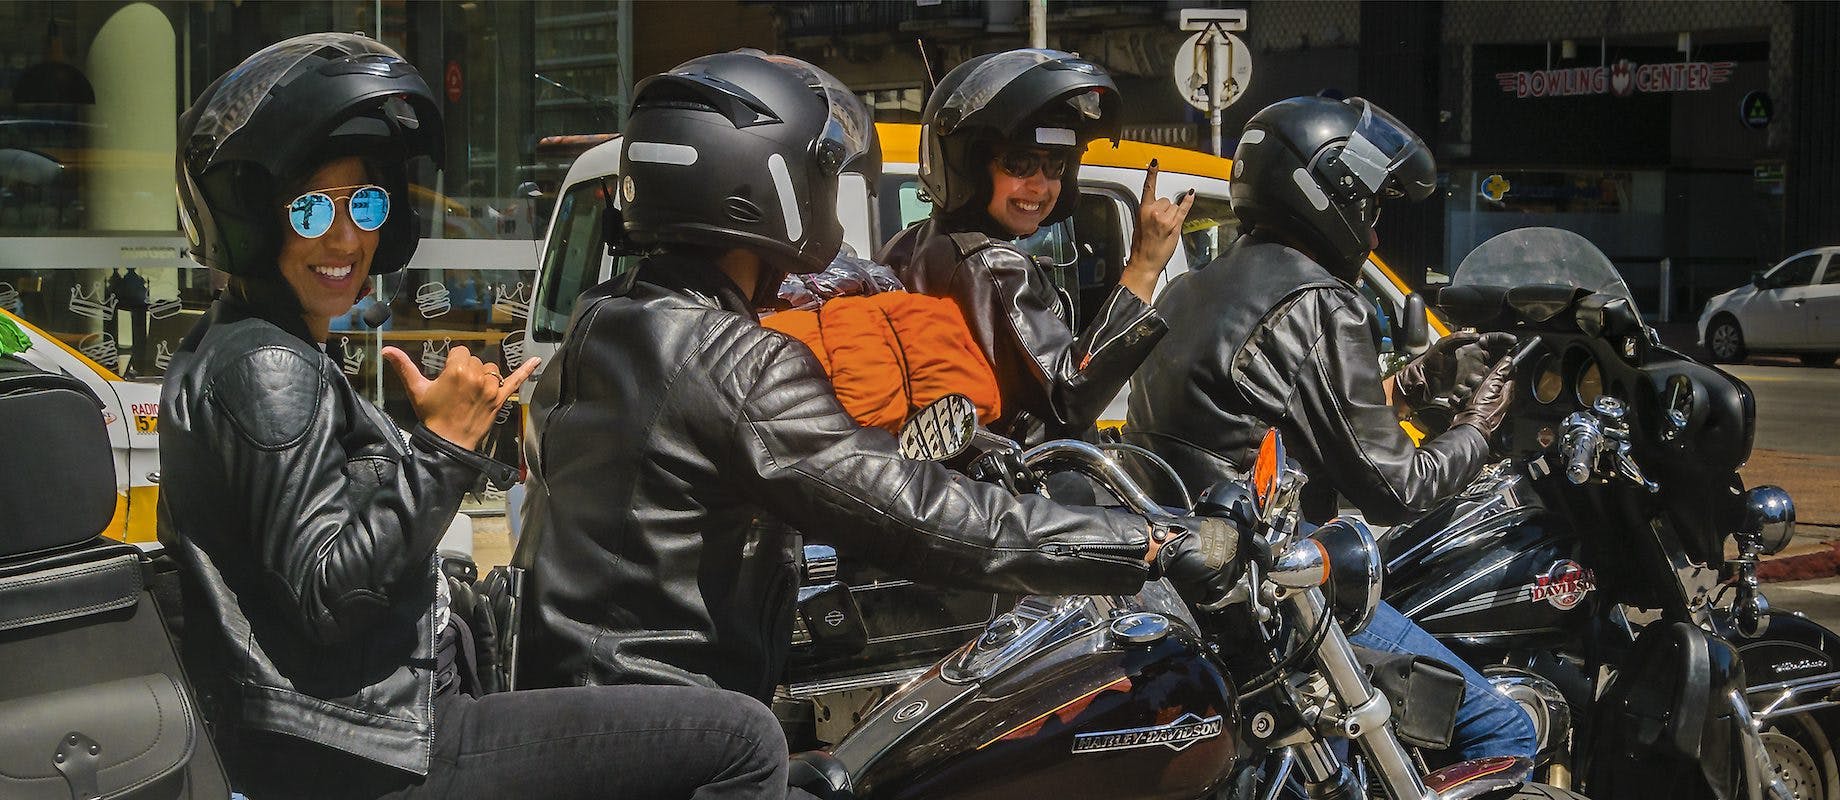 Bikers couples at montevideo street